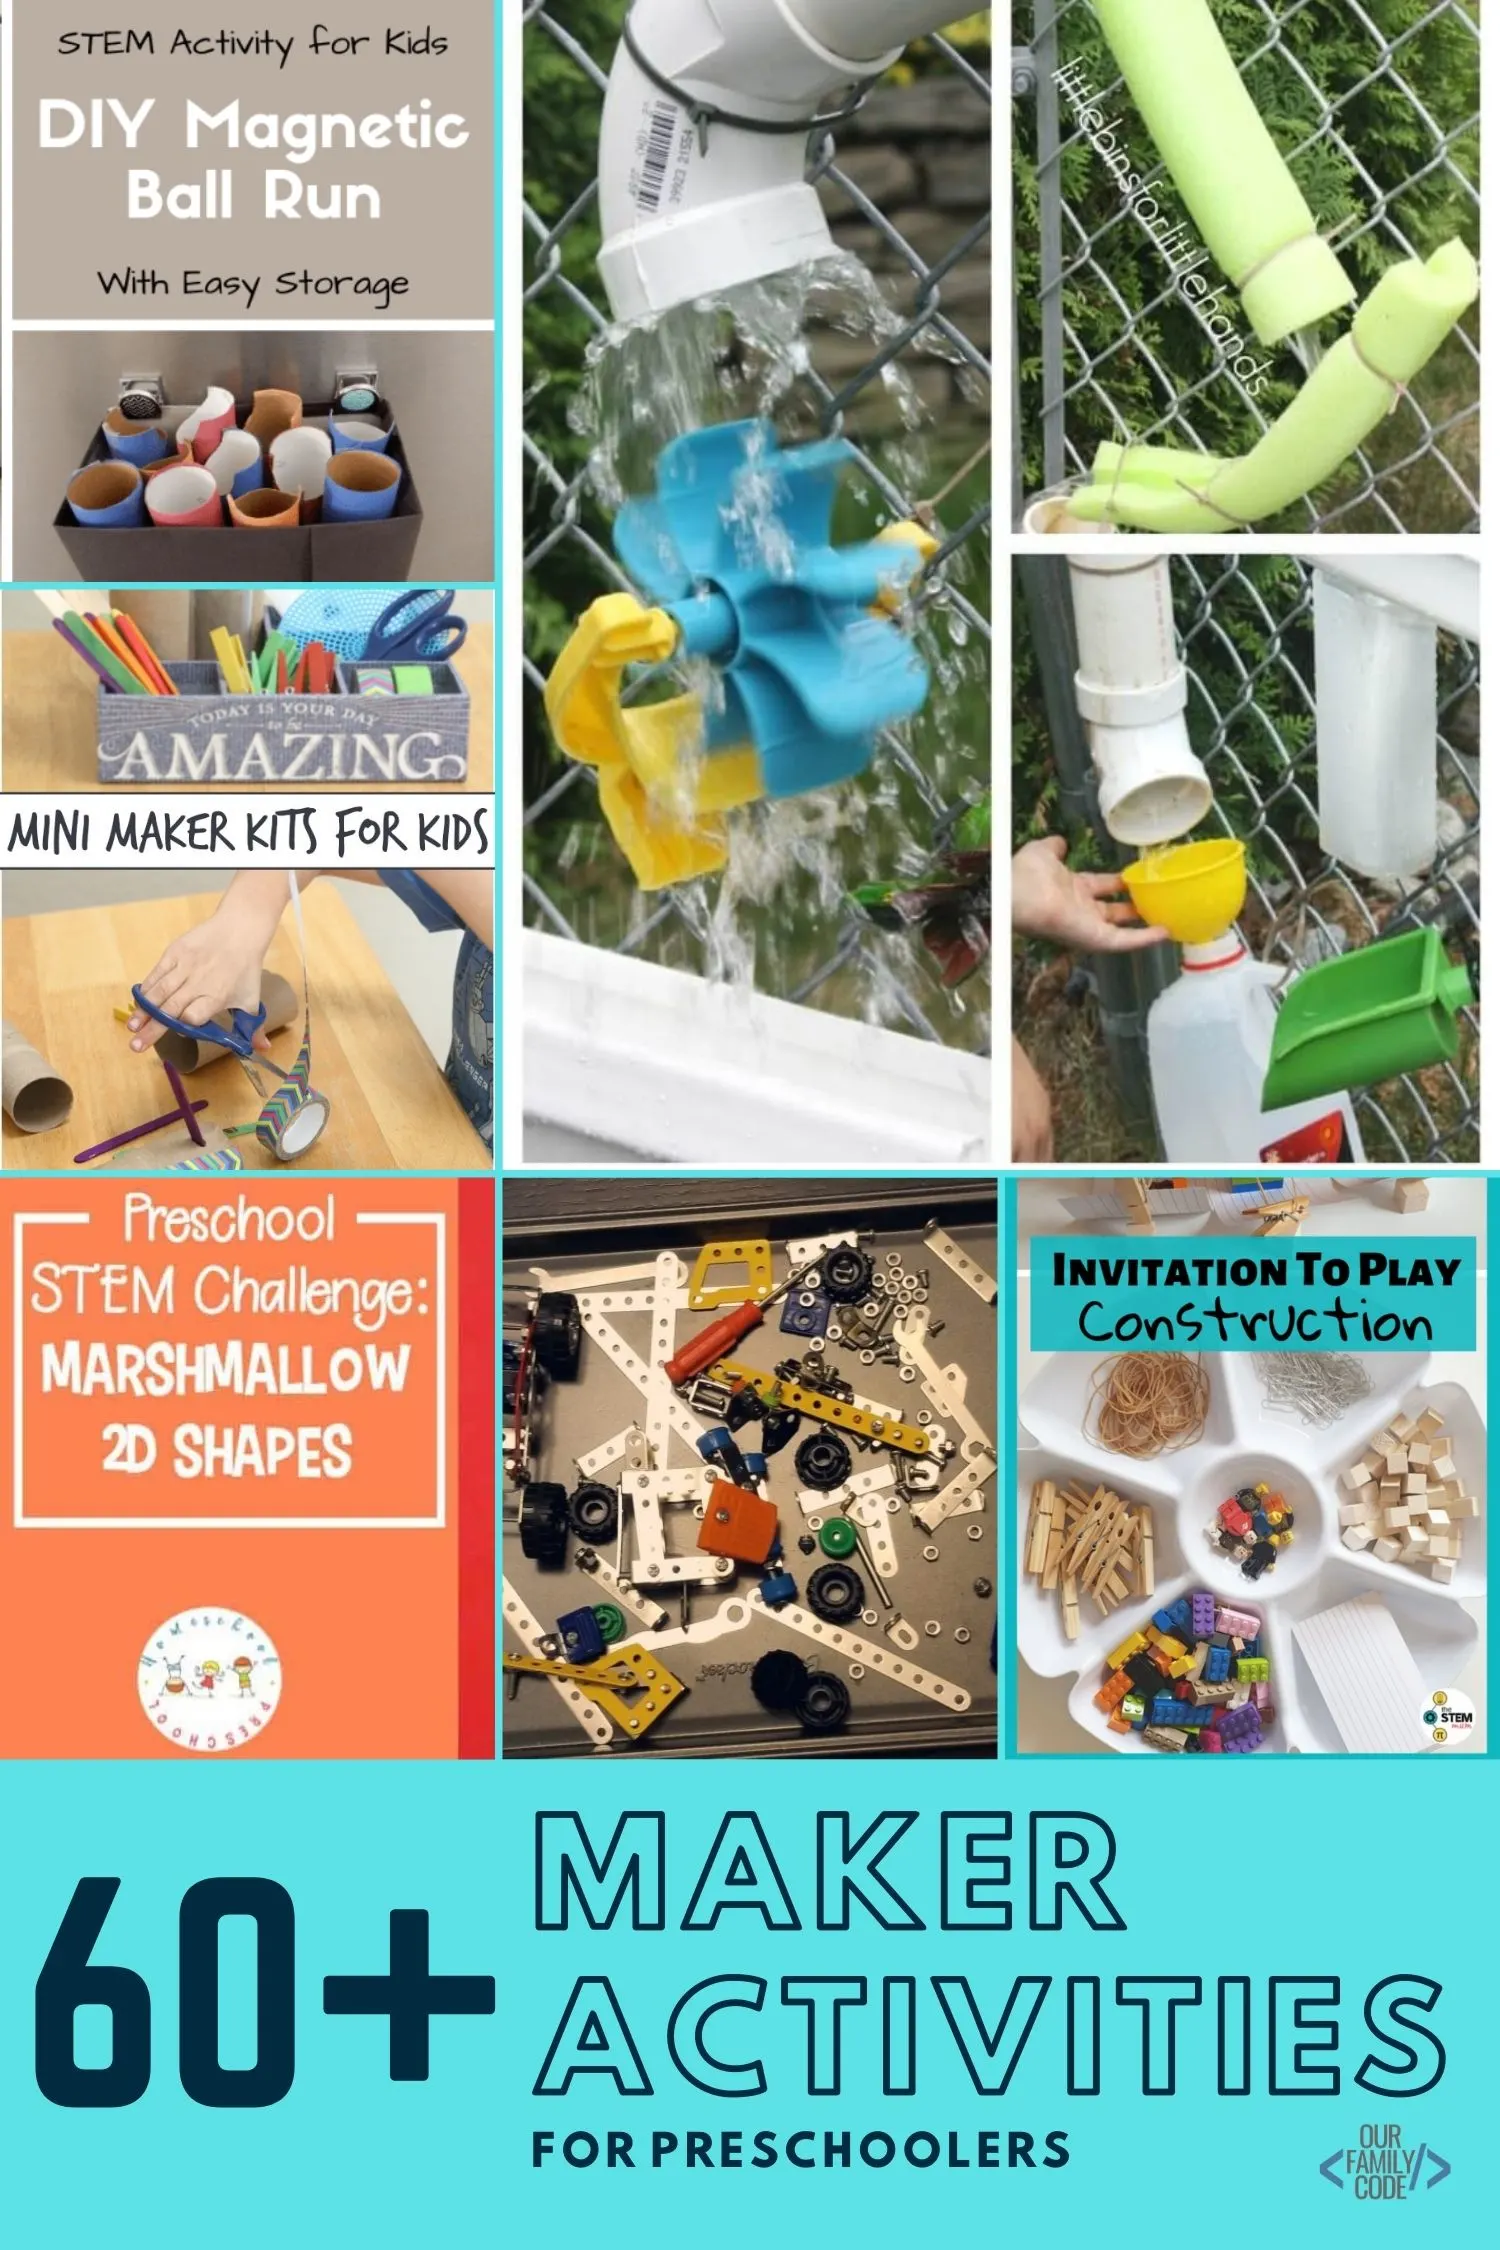 60+ Maker Activities for Kids - STEM Education - Our Family Code